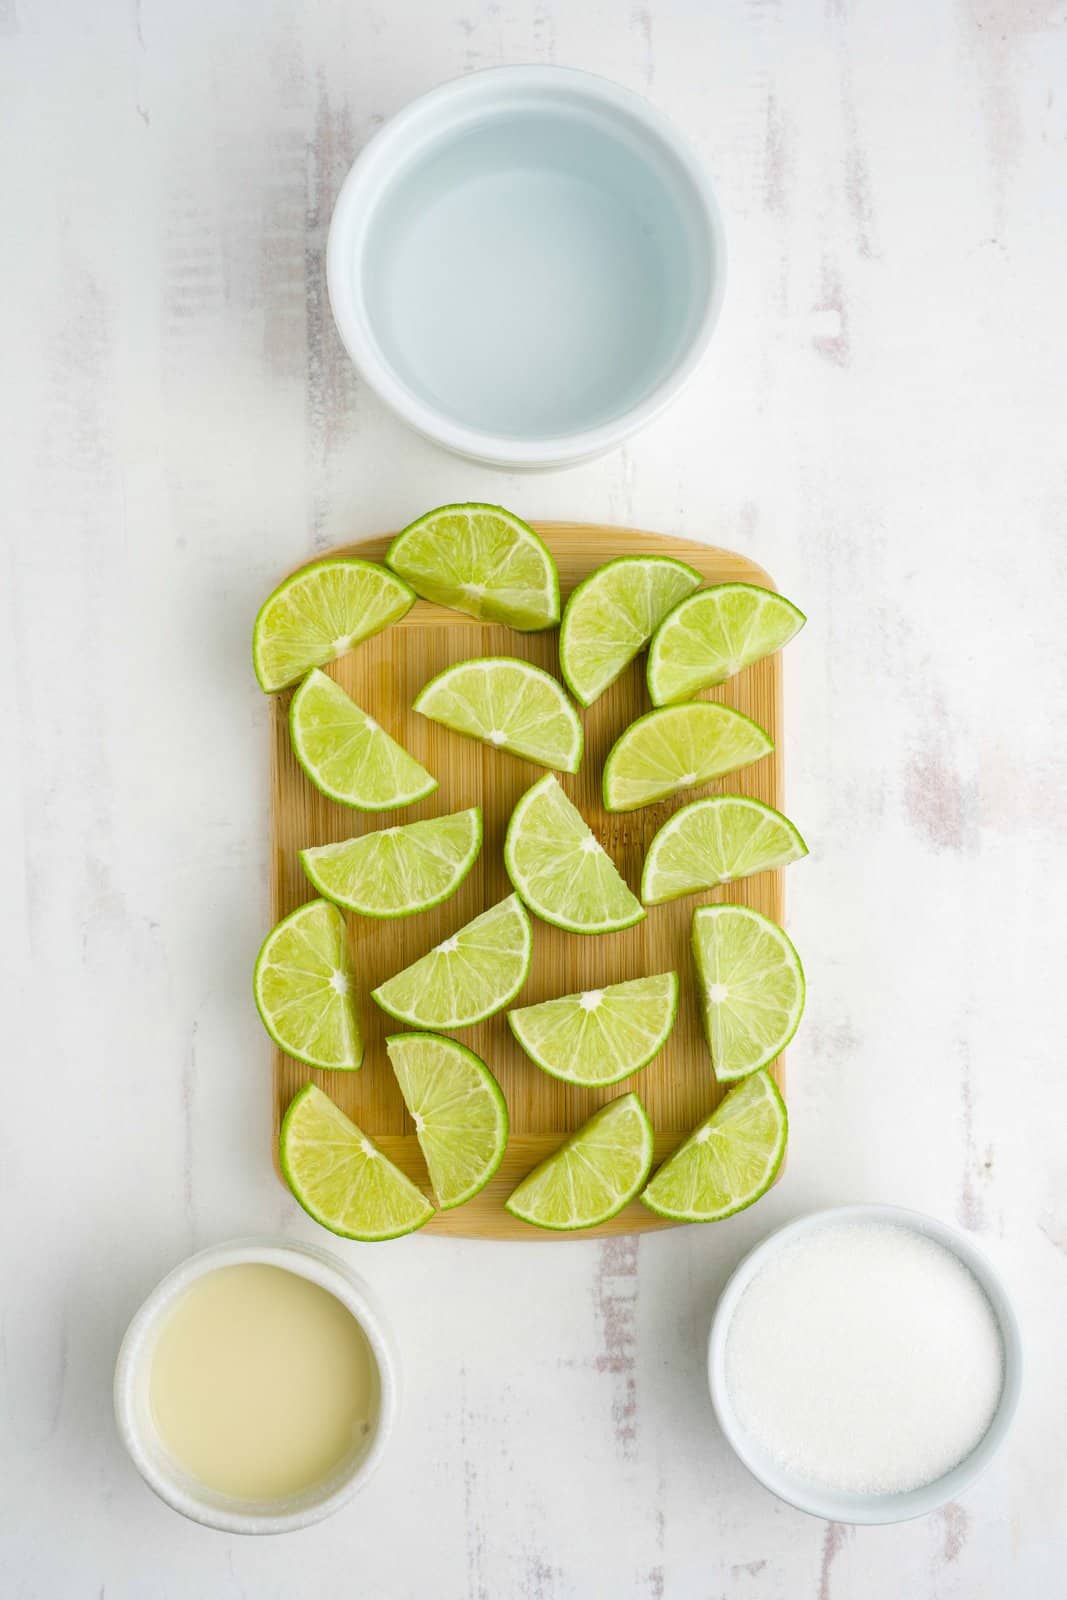 Lime wedges, sugar, cold water, and sweetened condensed milk.